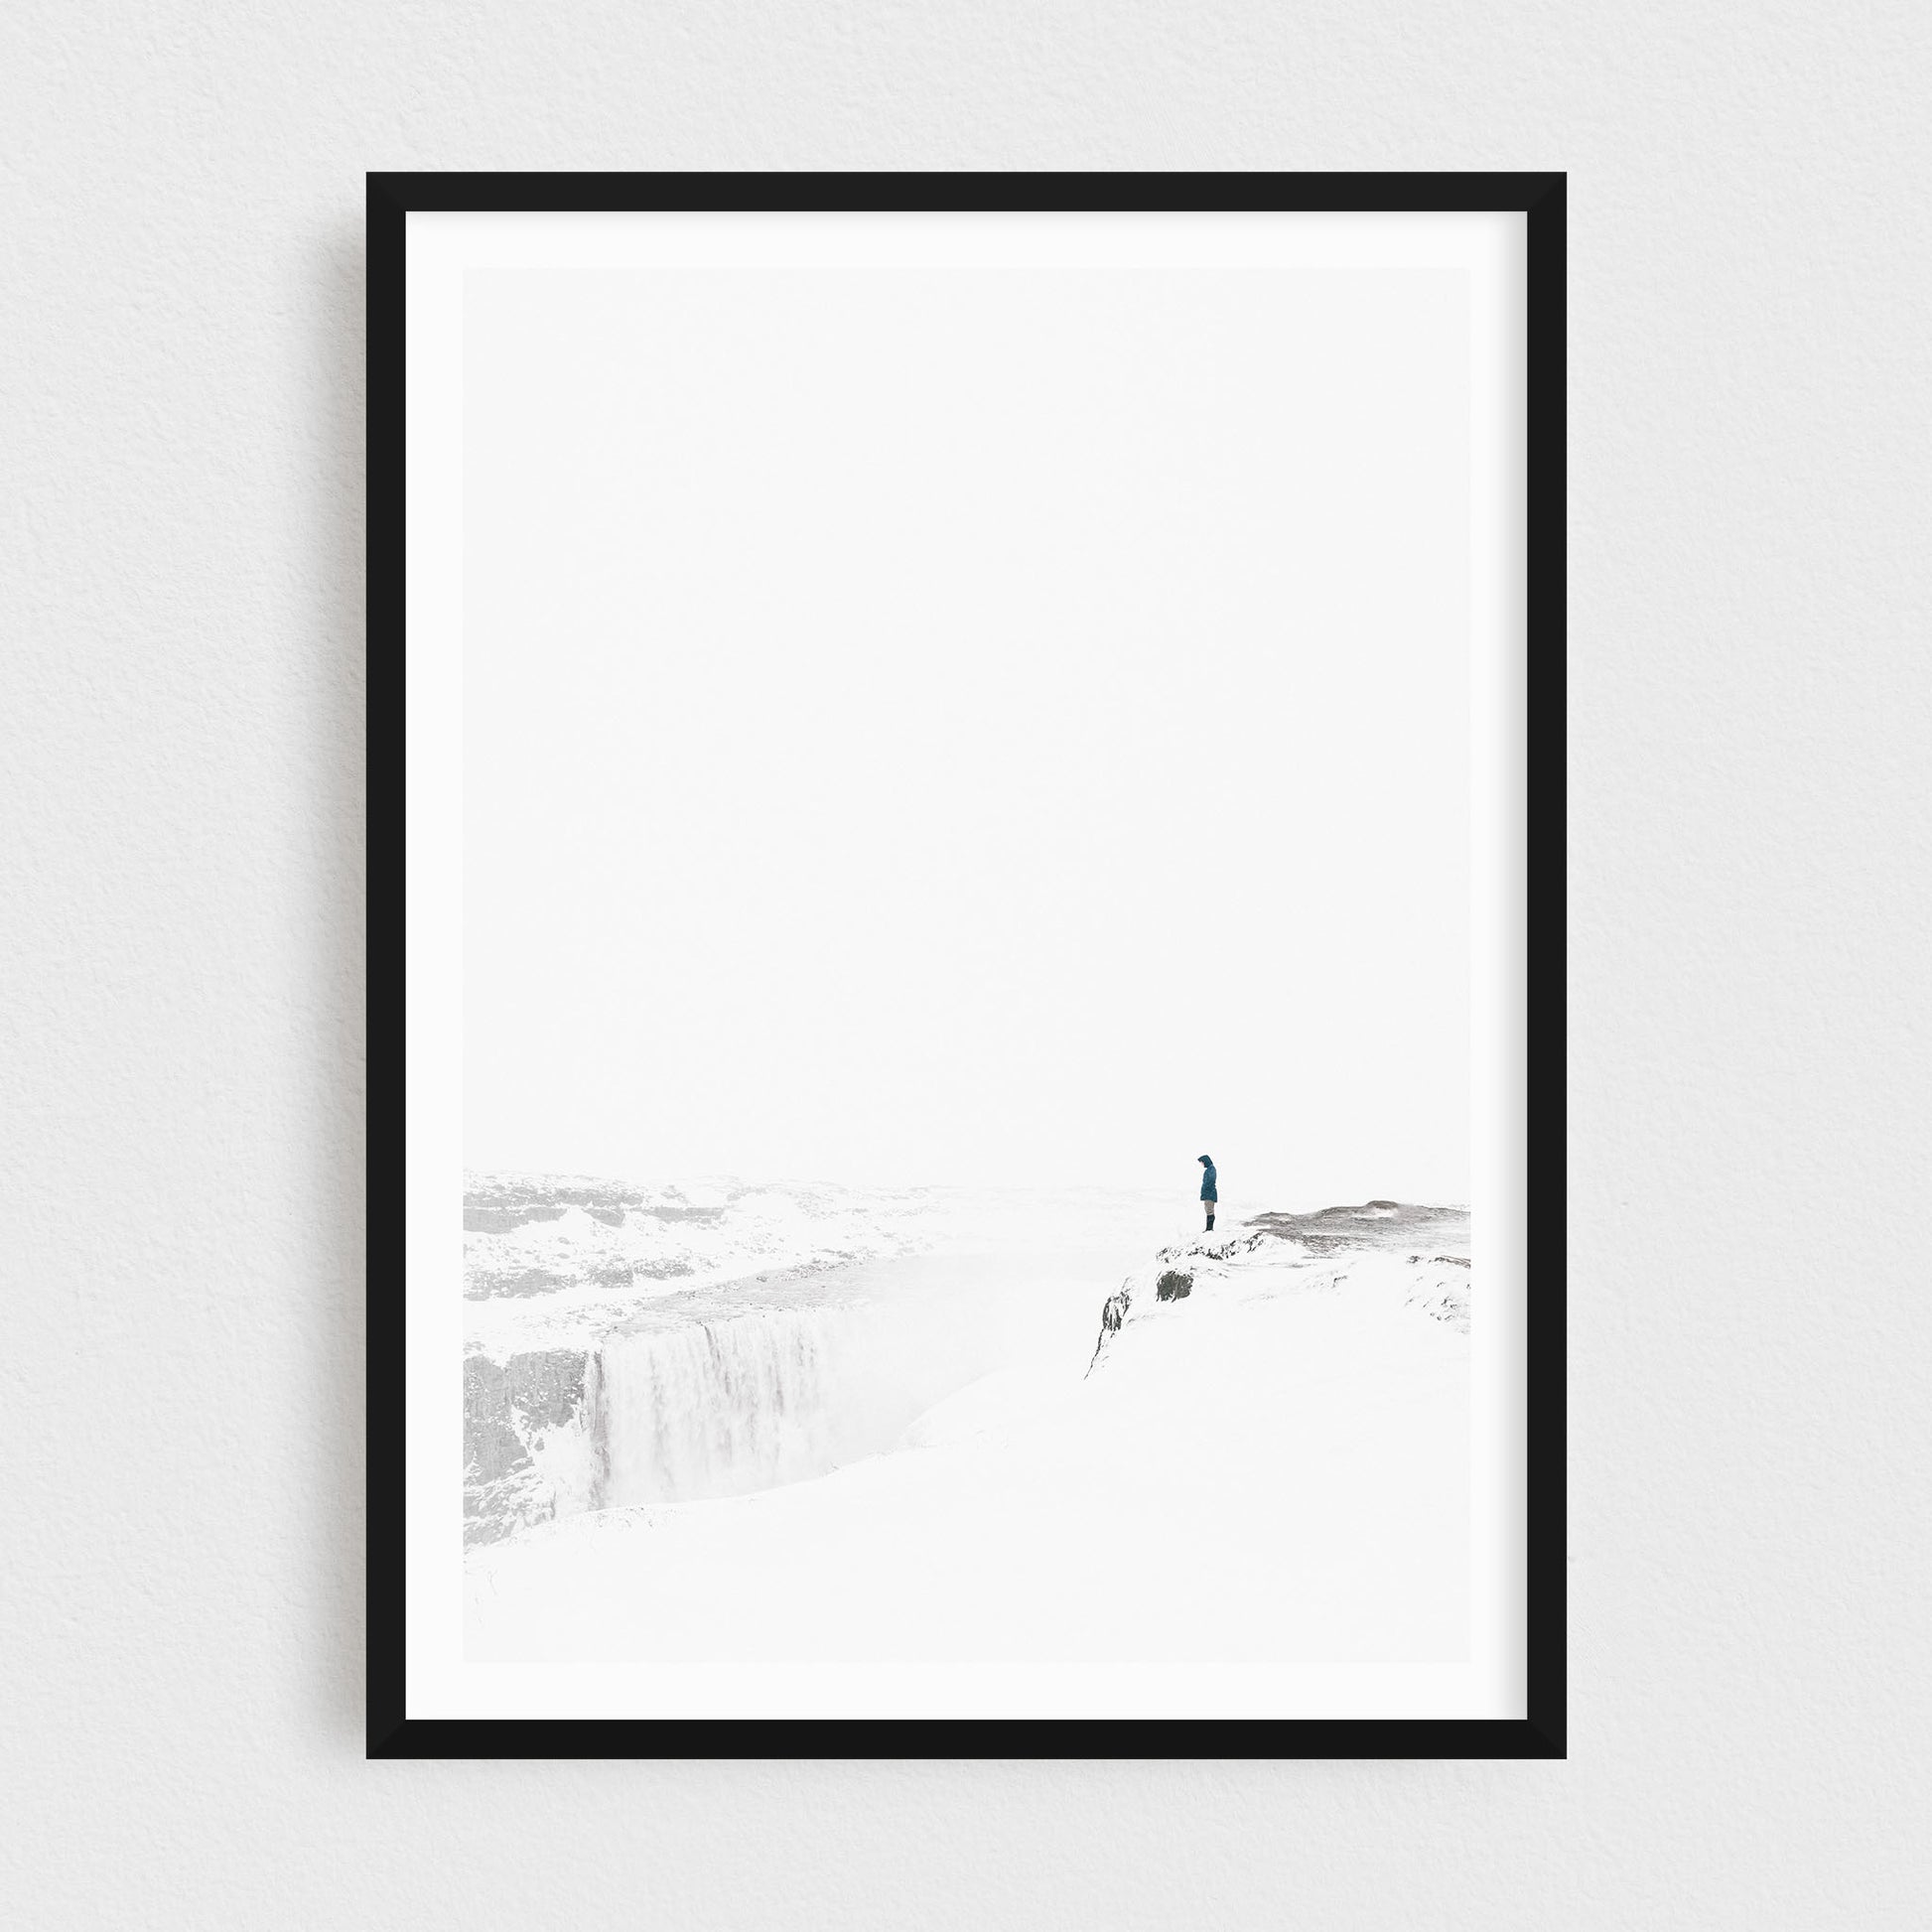 Iceland fine art photography print featuring Dettifoss waterfall in winter, in a black frame